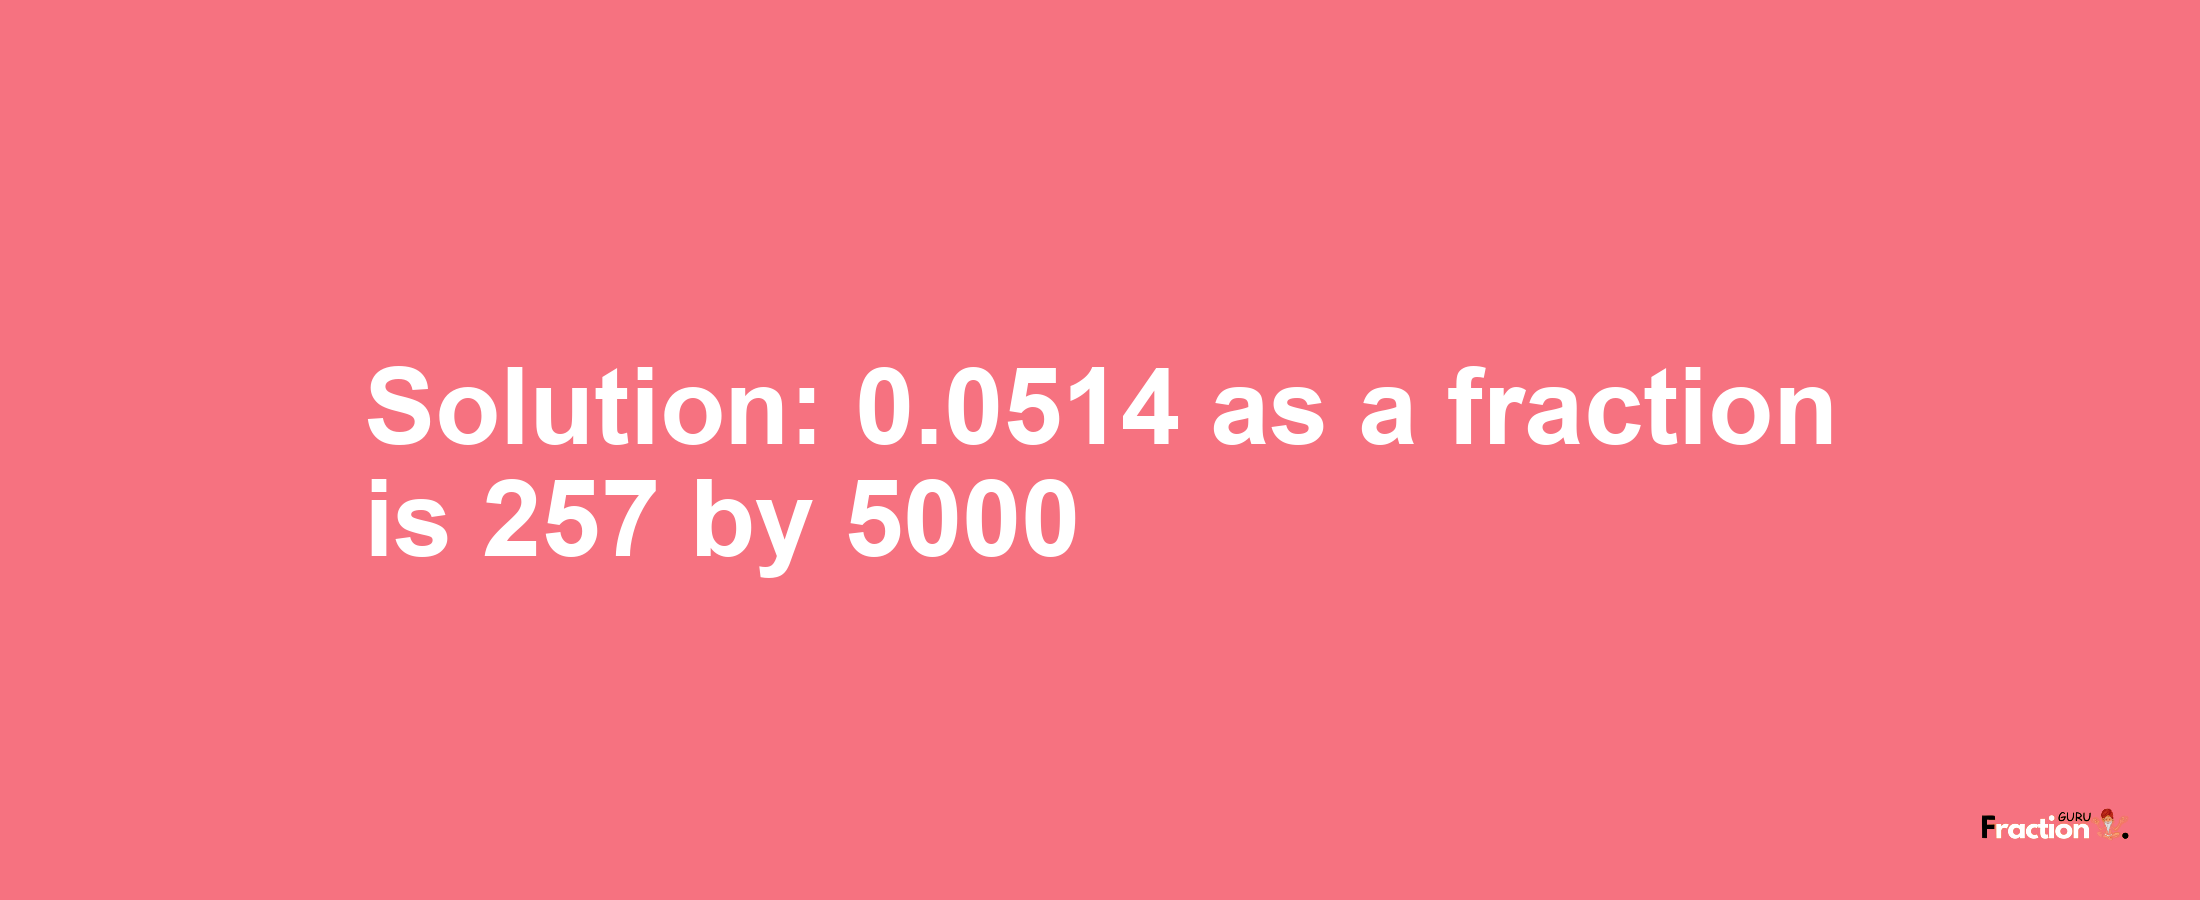 Solution:0.0514 as a fraction is 257/5000